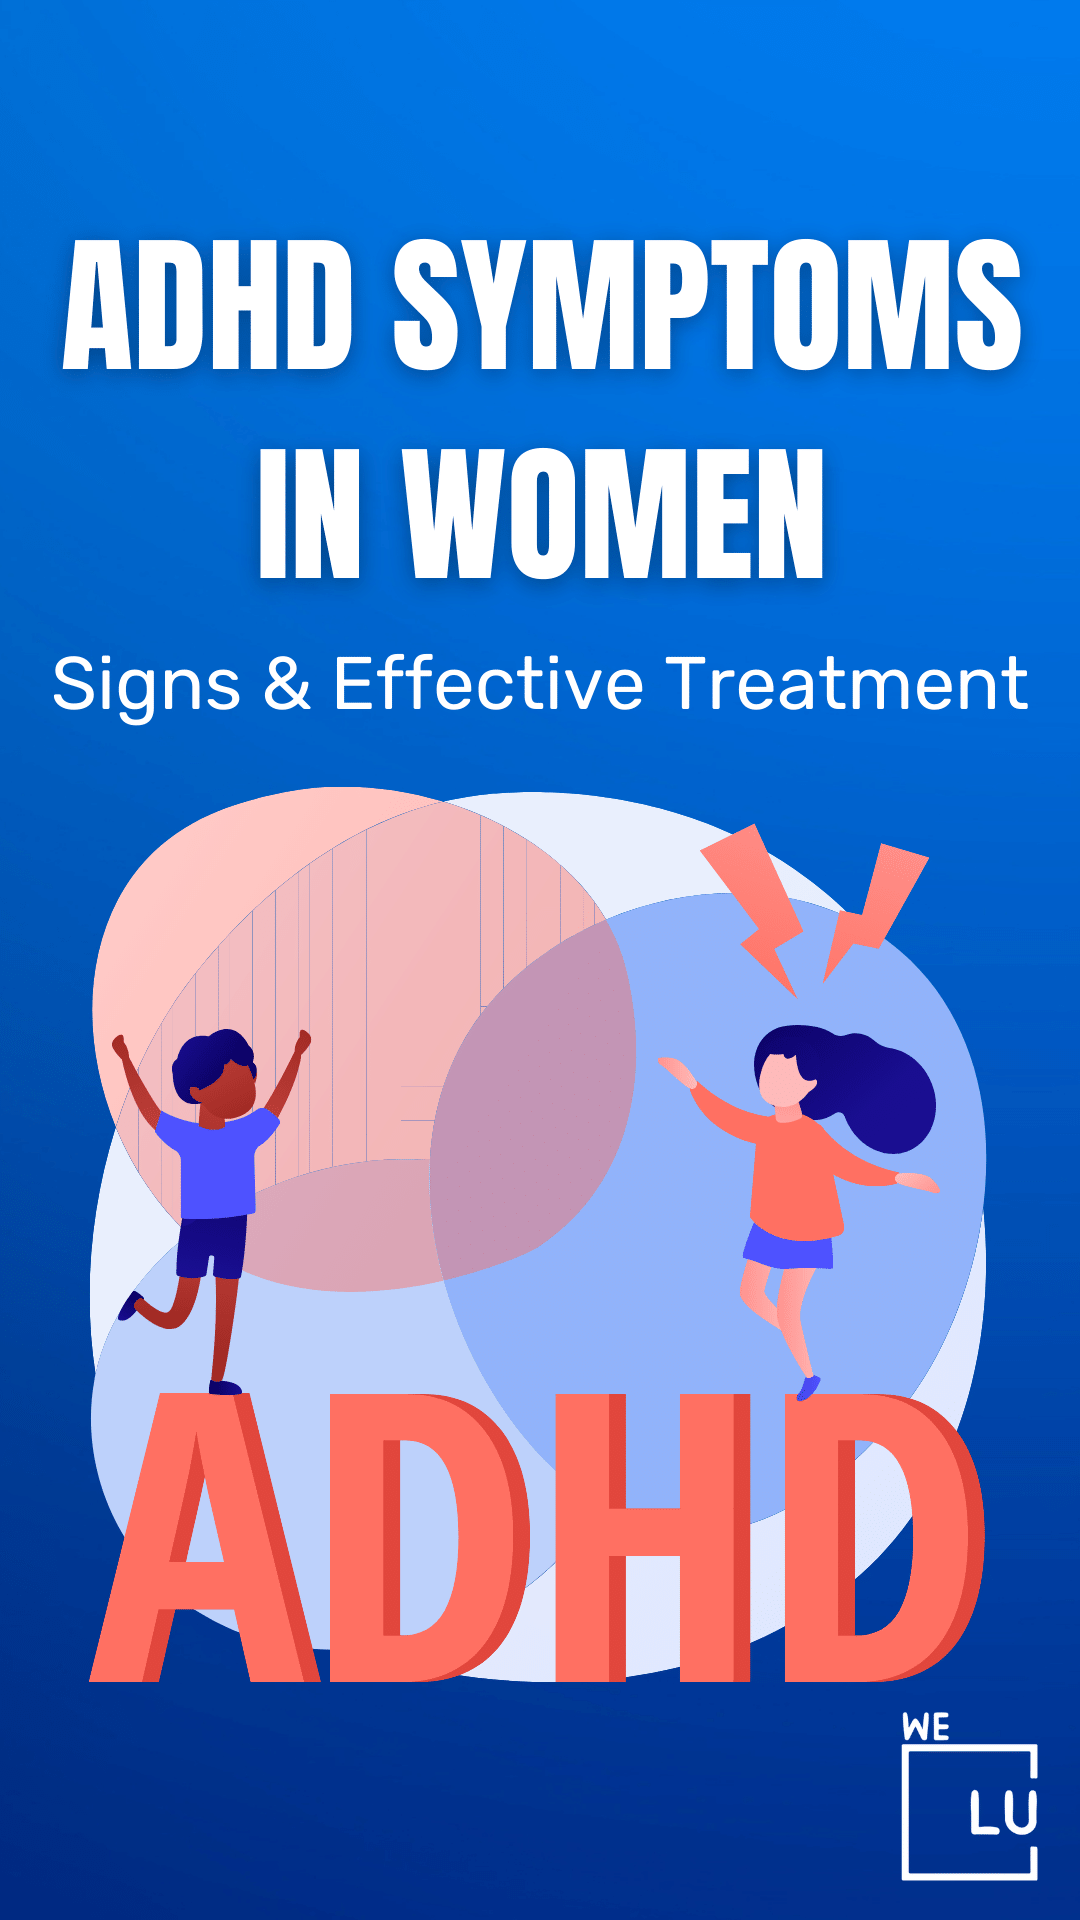 Signs of ADHD in women include the prevalence of other mental health disorders. Though not often listed as signs, other symptoms of ADD vs ADHD in women include co-occurring depression and anxiety, complicated relationships that can lead to intimate partner violence, trouble maintaining friendships, and at least one space in her life in disarray, such as a messy house or bedroom.